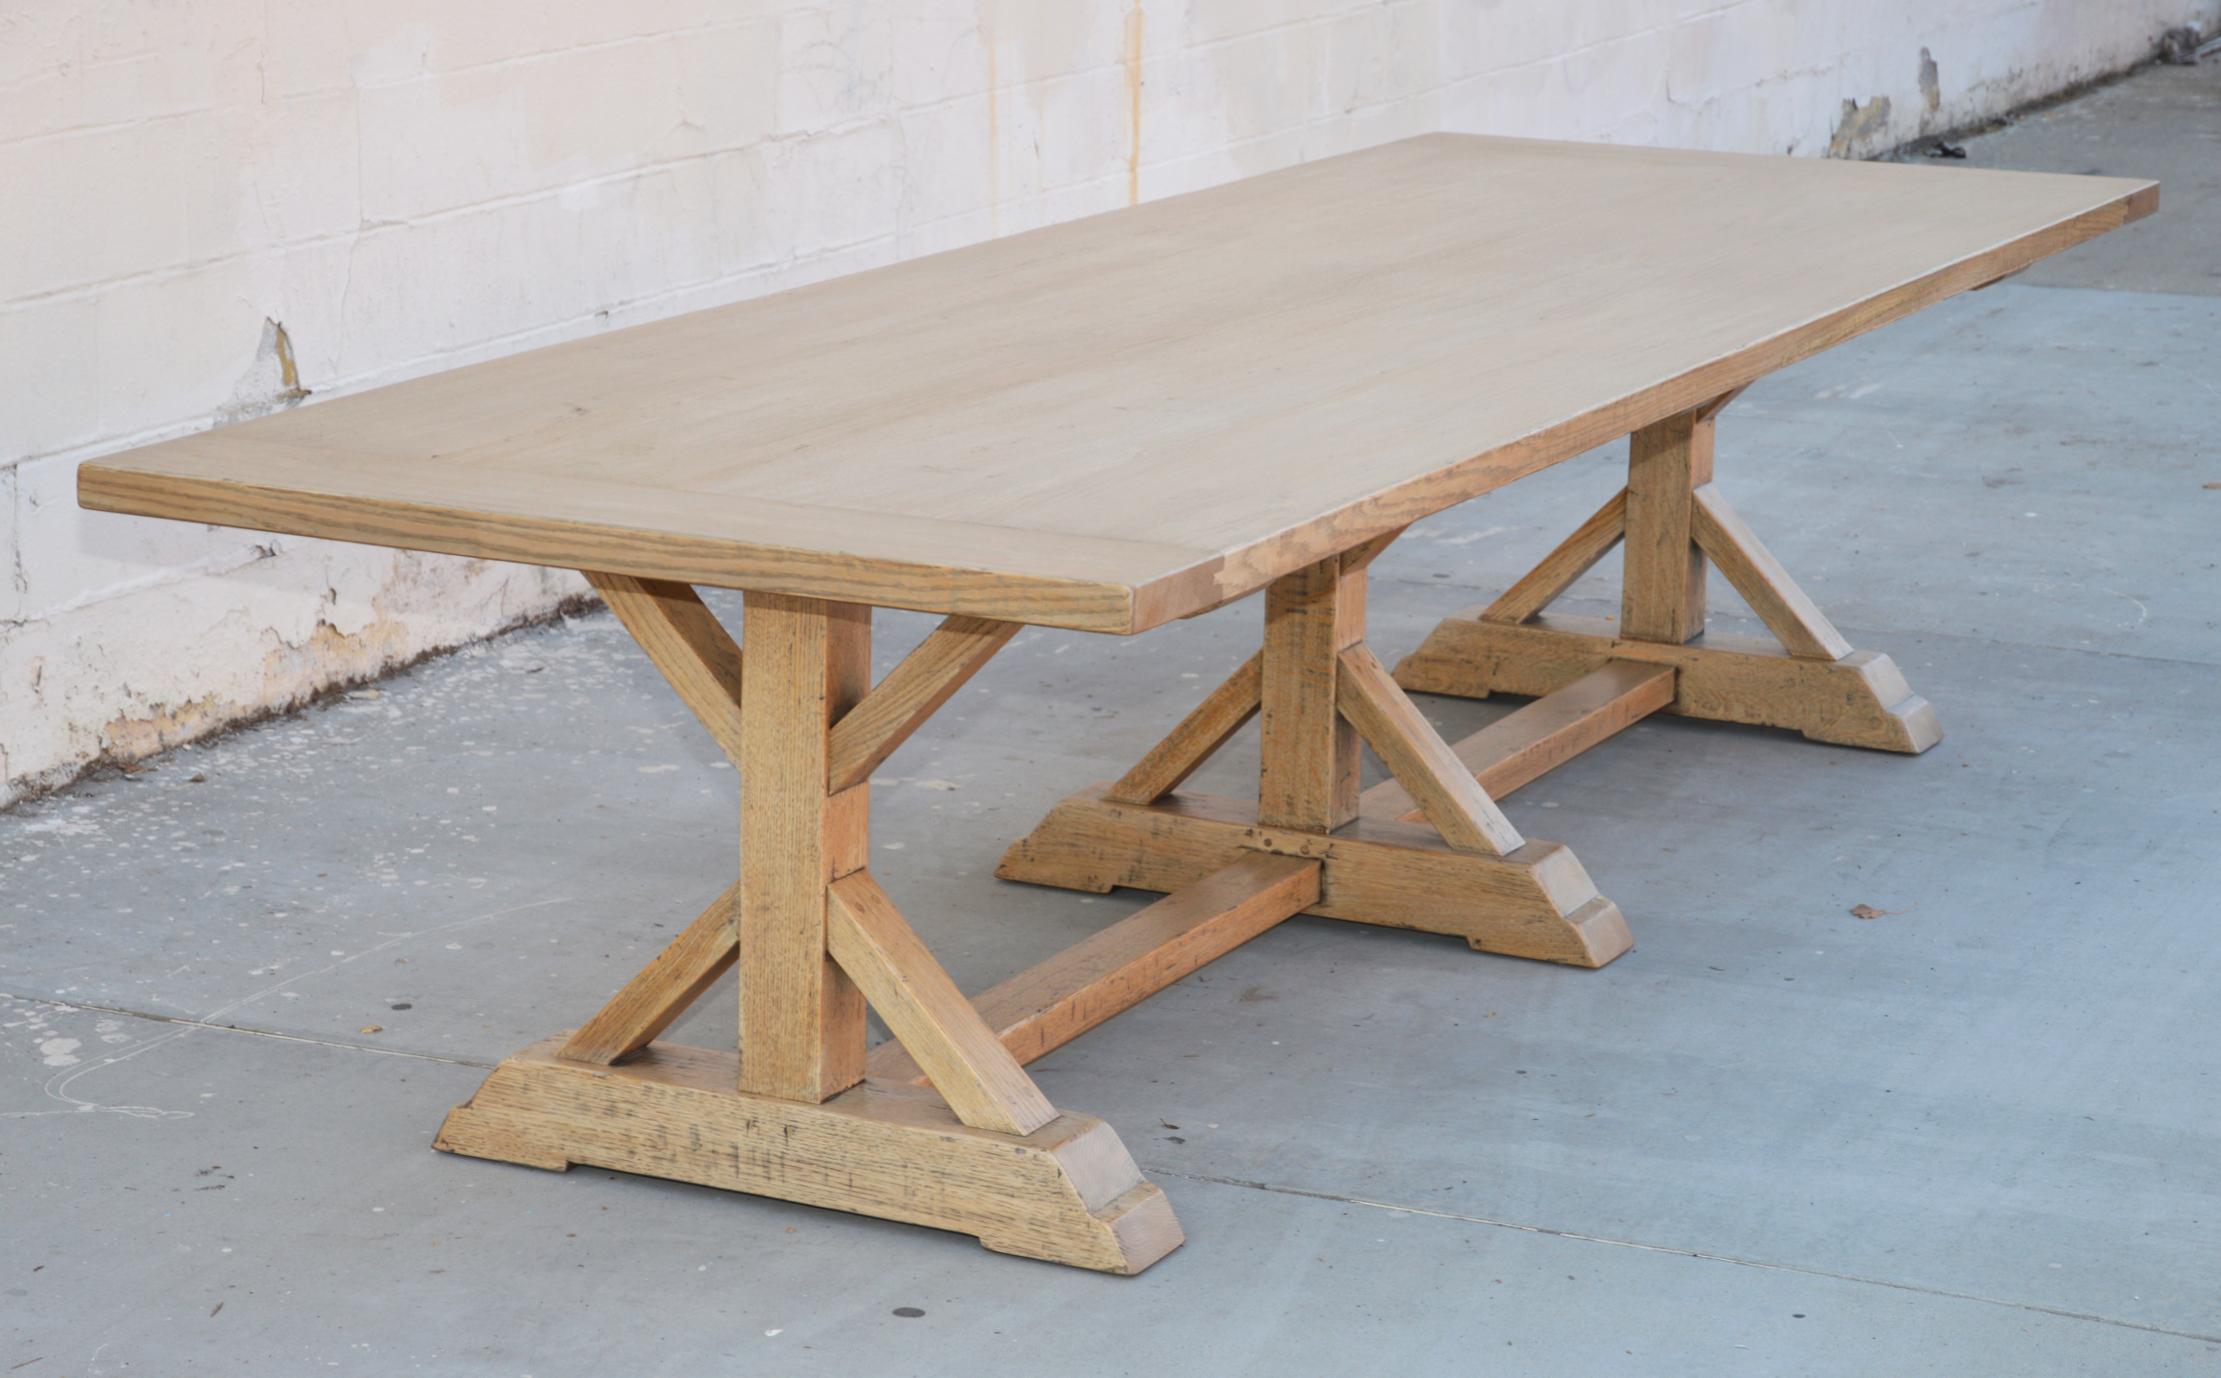 This oak farm table is seen here in 132